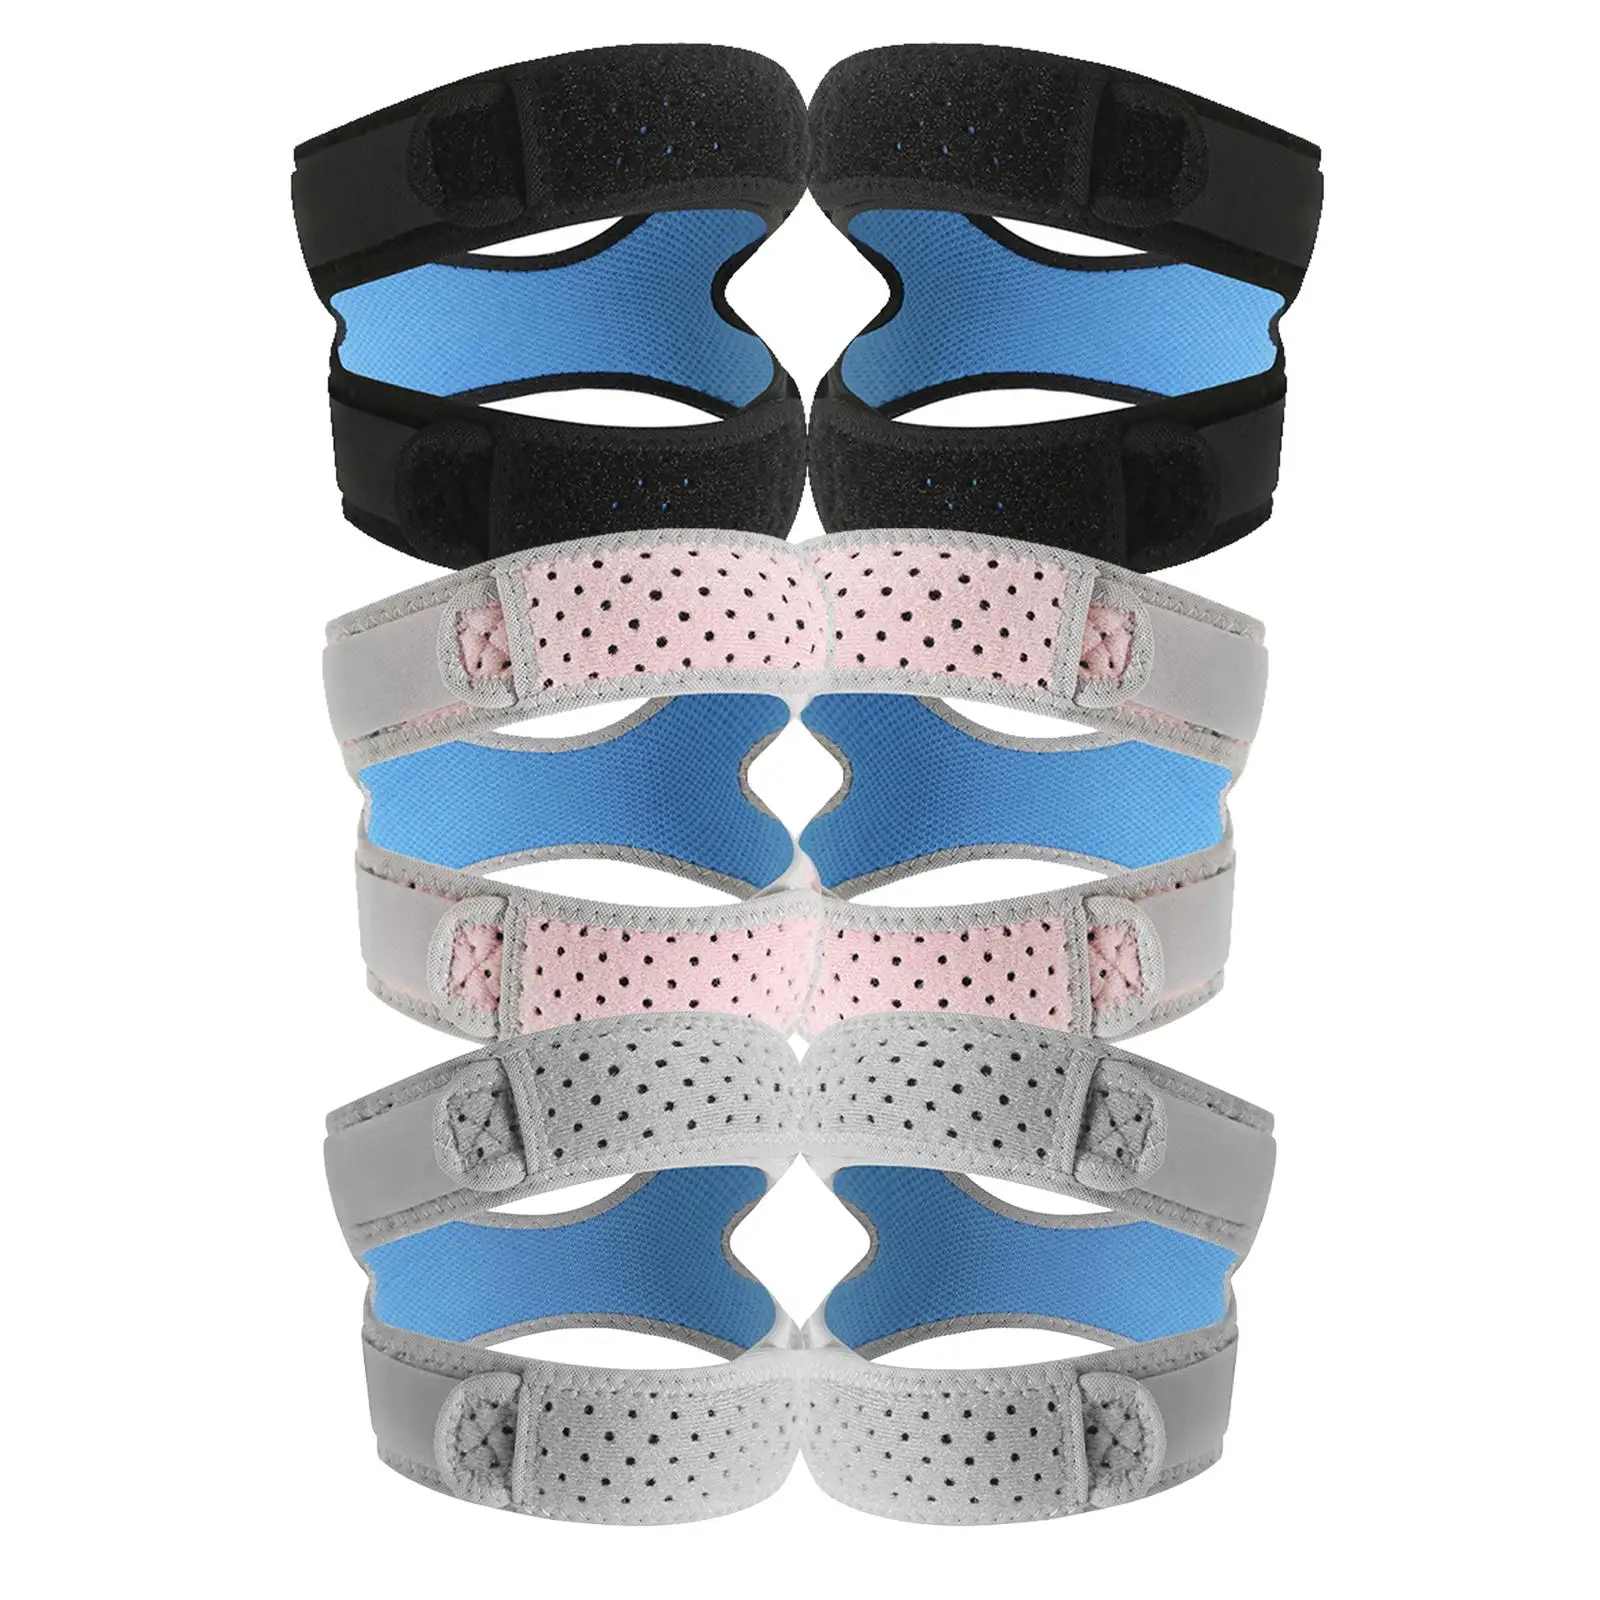 Knee Pads Support Breathable Bandage Men Women Adjustable Band Knee Brace for Jogging Fitness Cycling Tennis Climbing Mountain